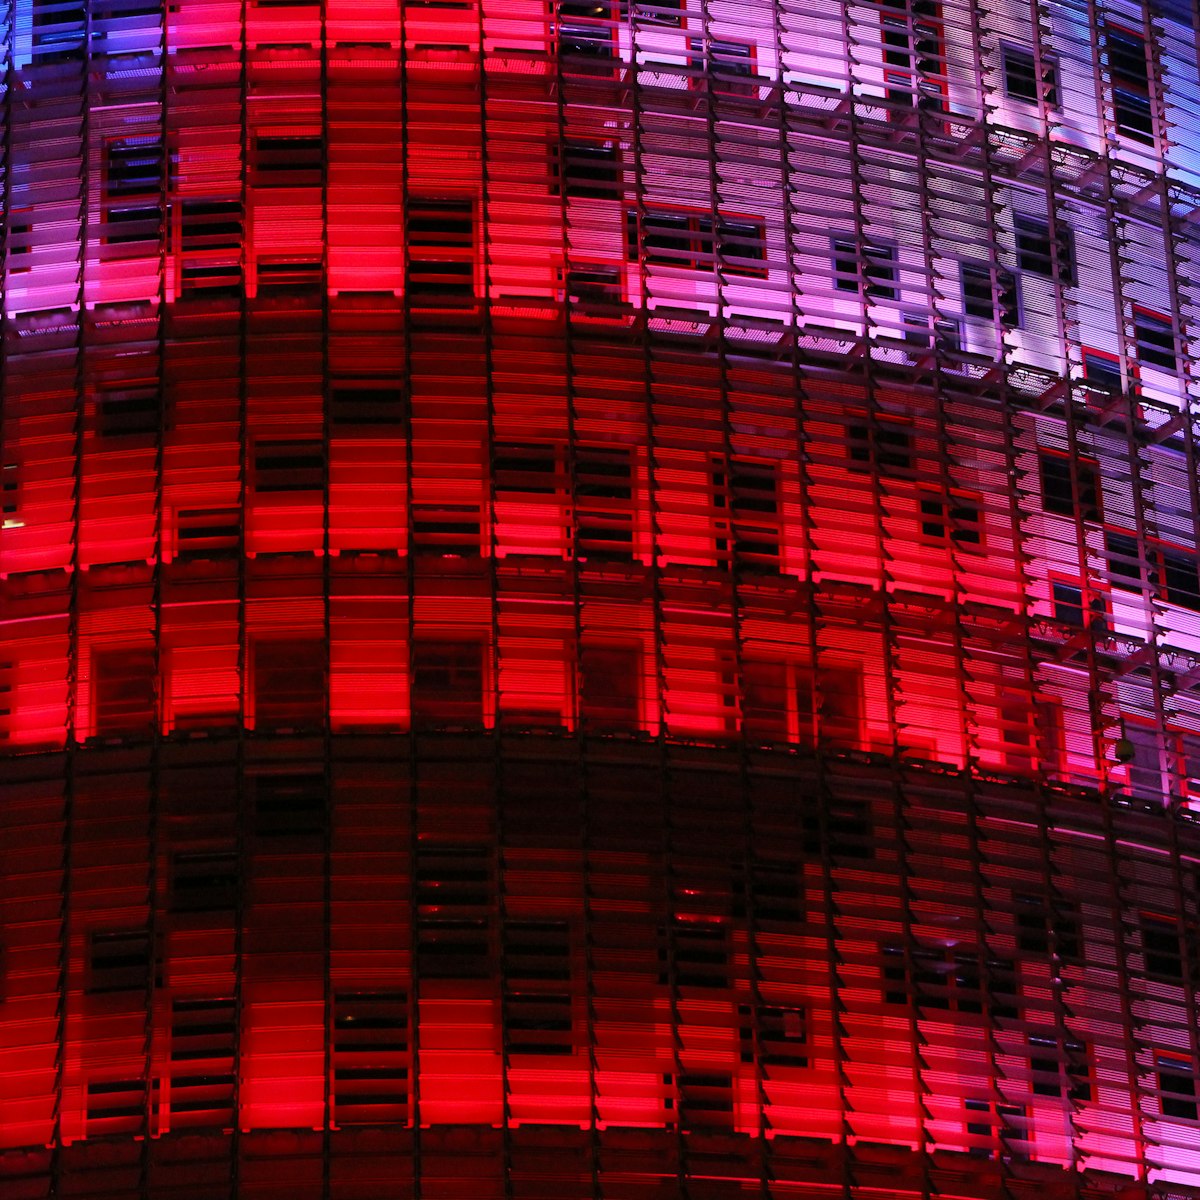 Torre Agbar by night.